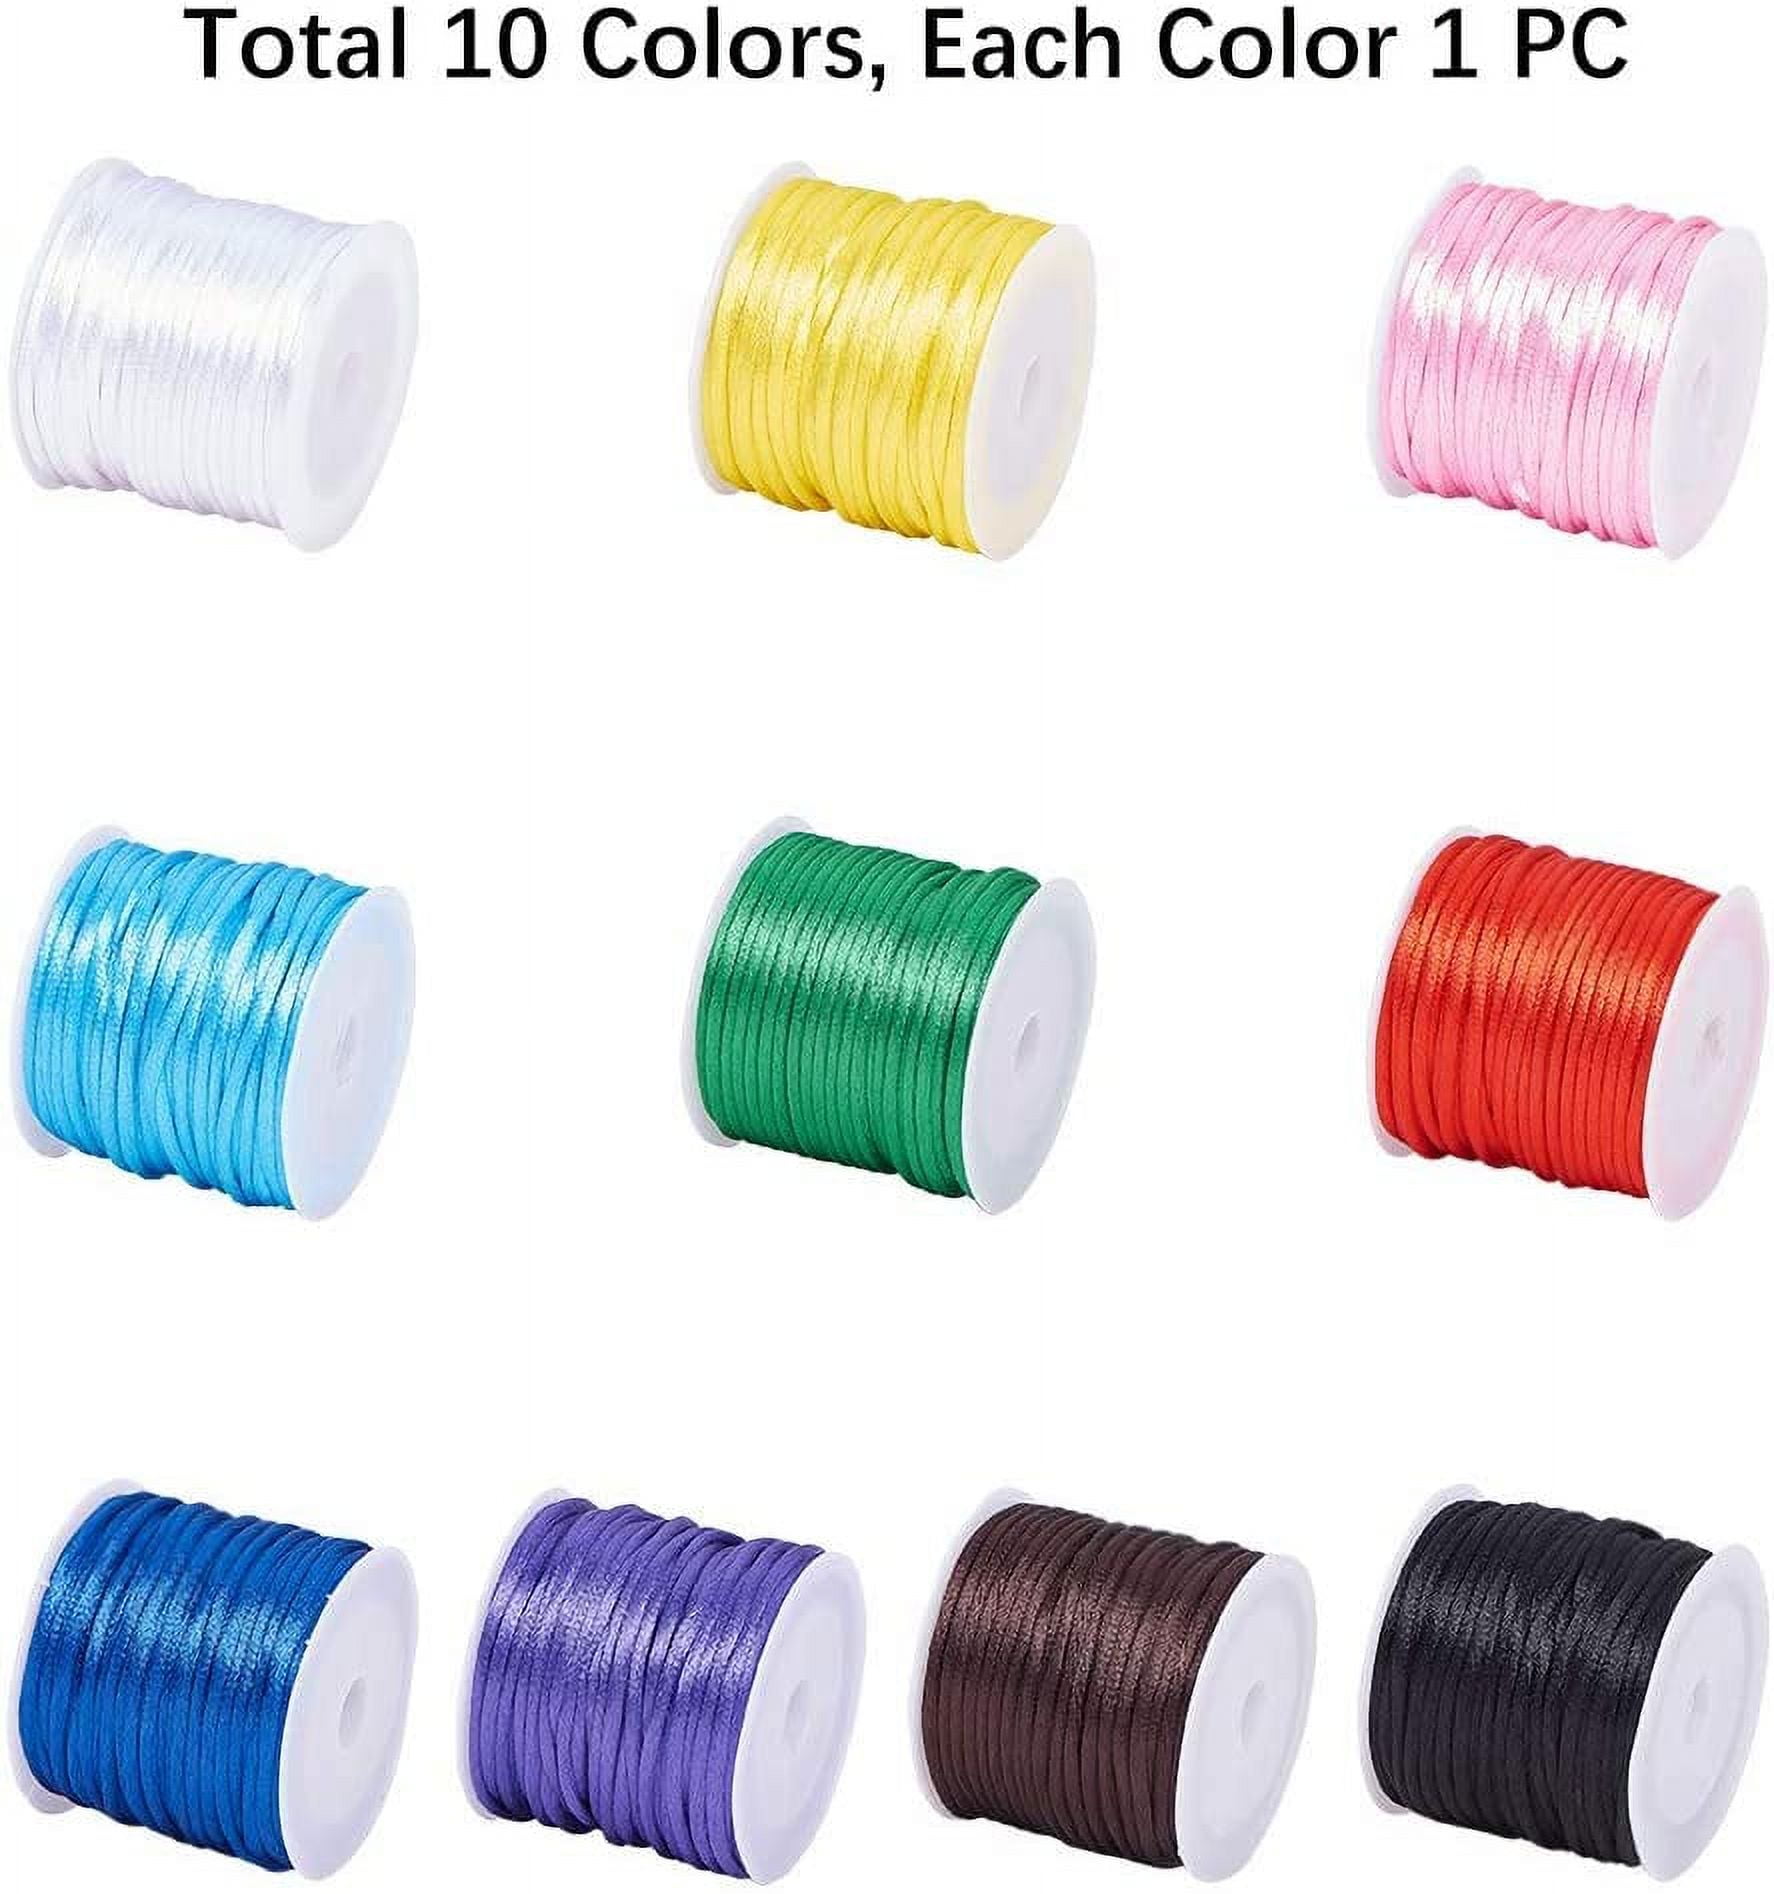  BigOtters 2mm Satin Nylon Trim Cord, 12 Bundles Rattail Silk  String Chinese Knotting Cord Assorted Colors for Bracelet Beading Jewelry  Making, 120 Yards